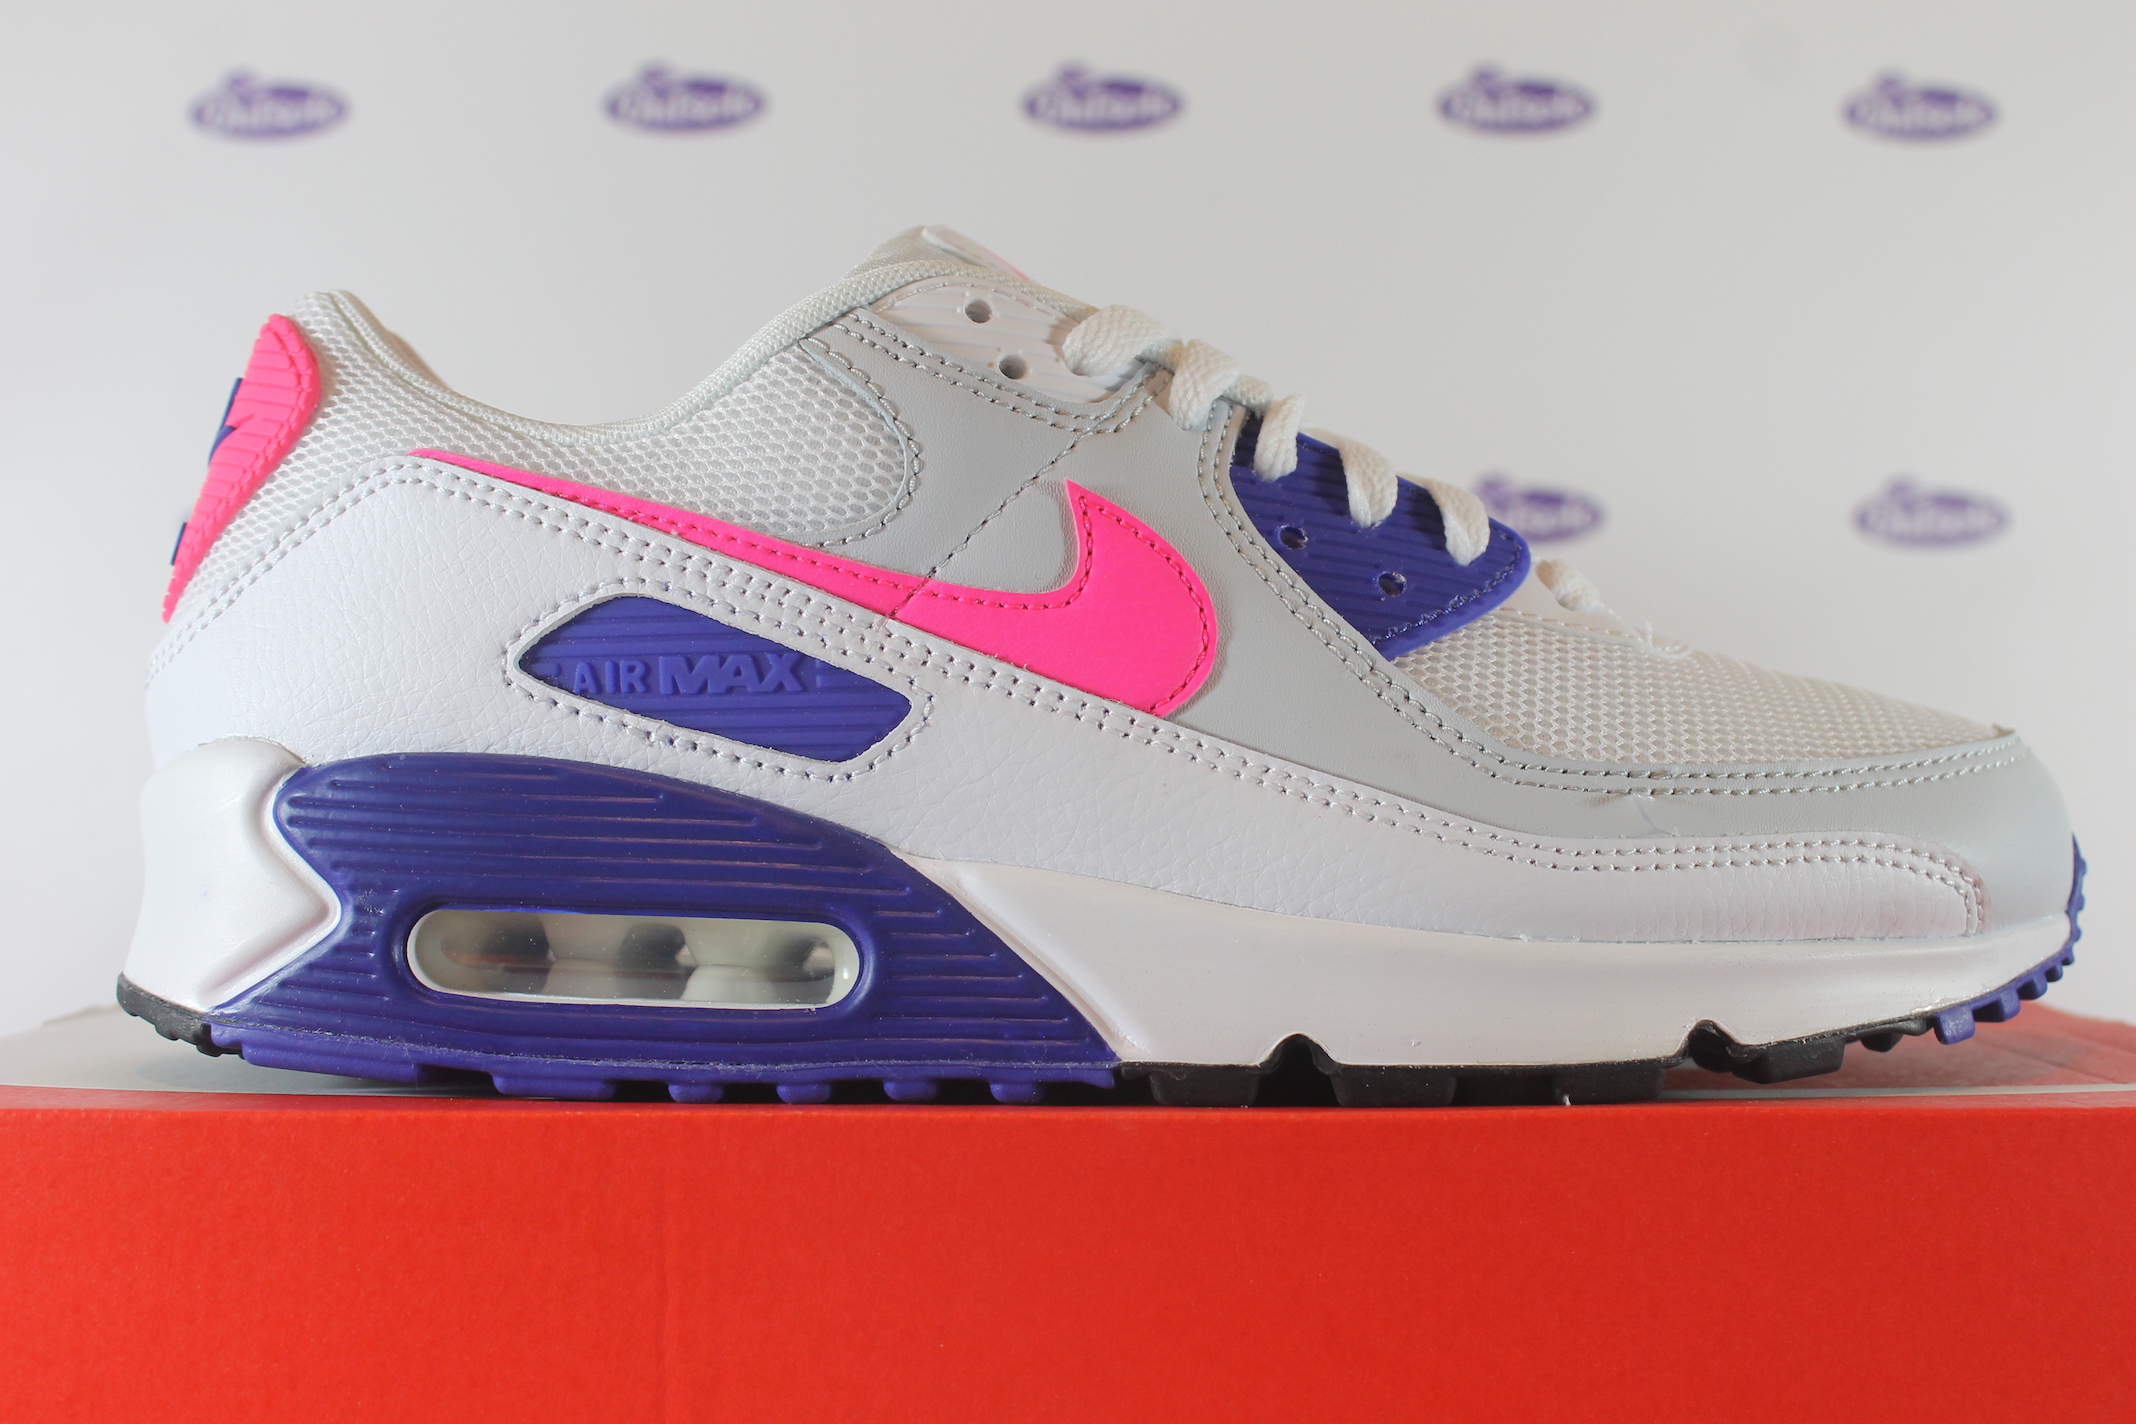 Preek afwijzing Scheermes Nike Air Max 90 Hyper Pink • ✓ In stock at Outsole